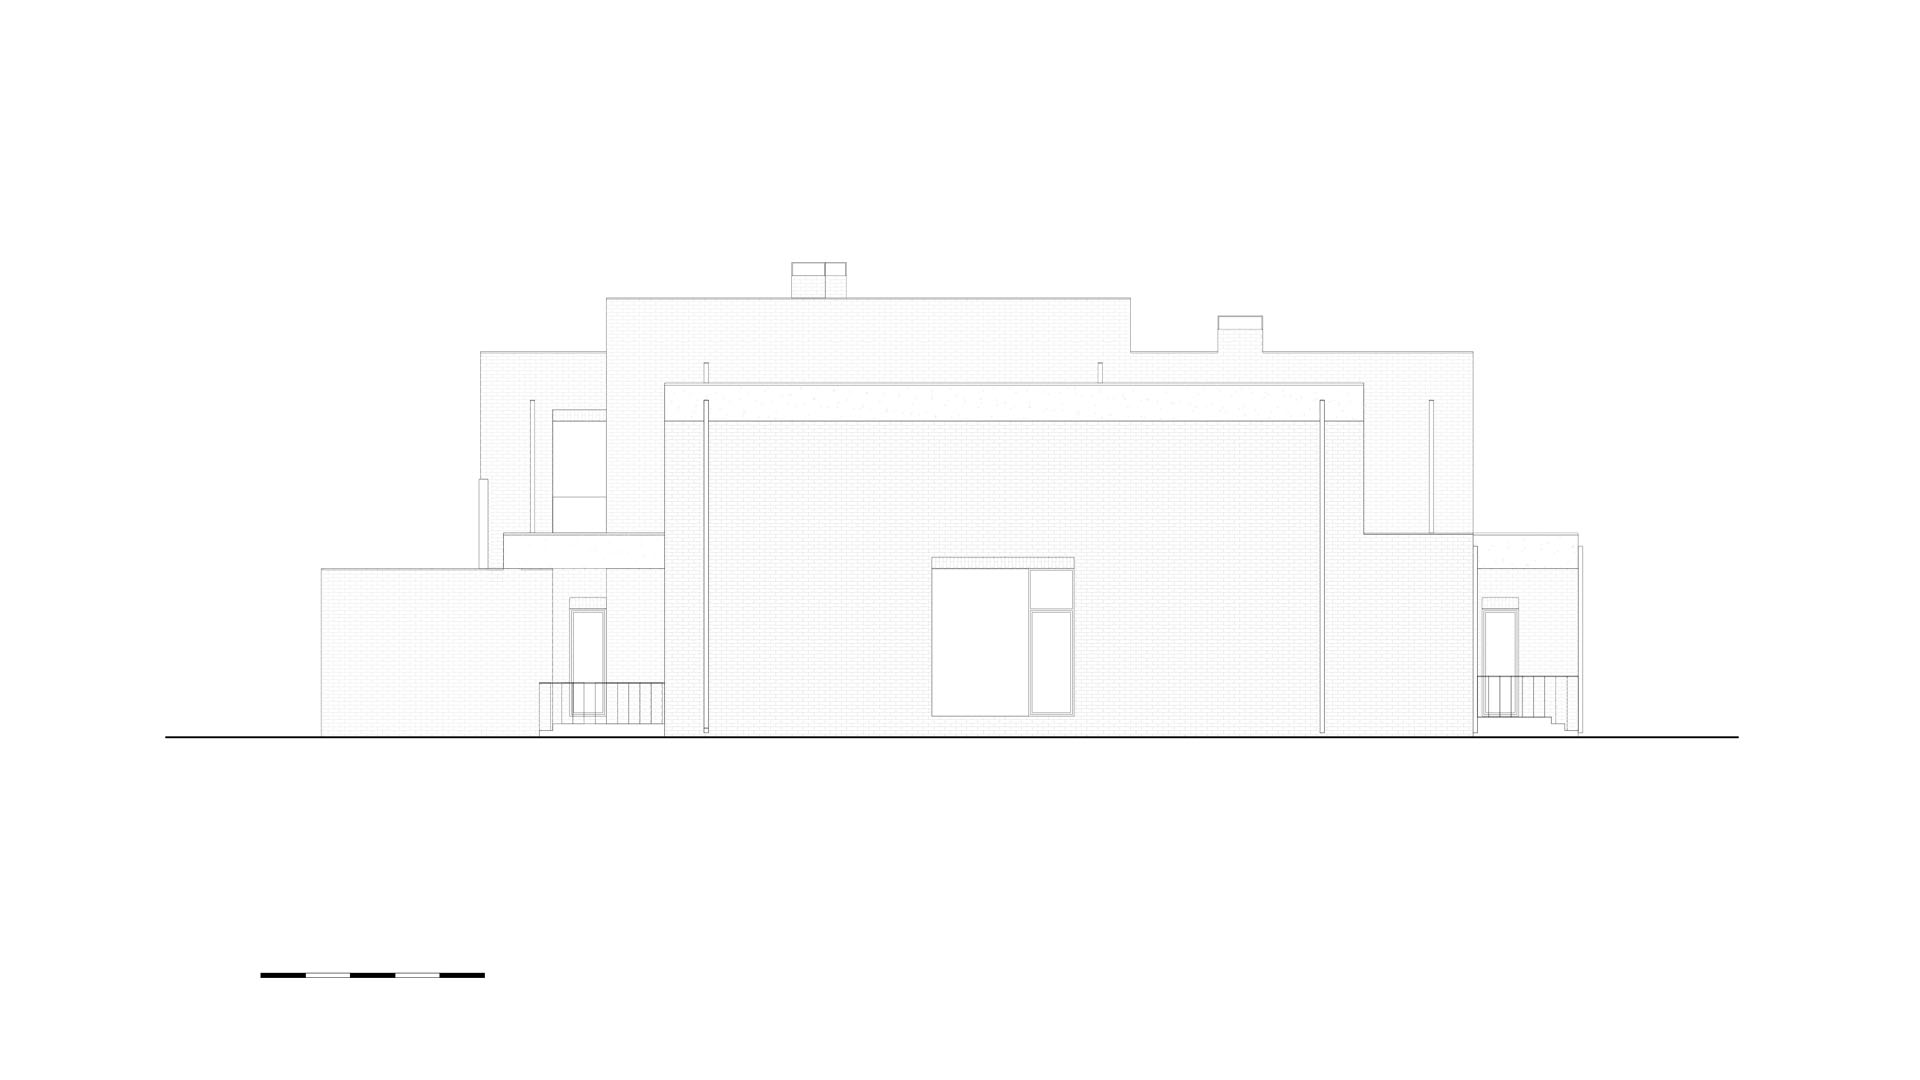 the layout of the house